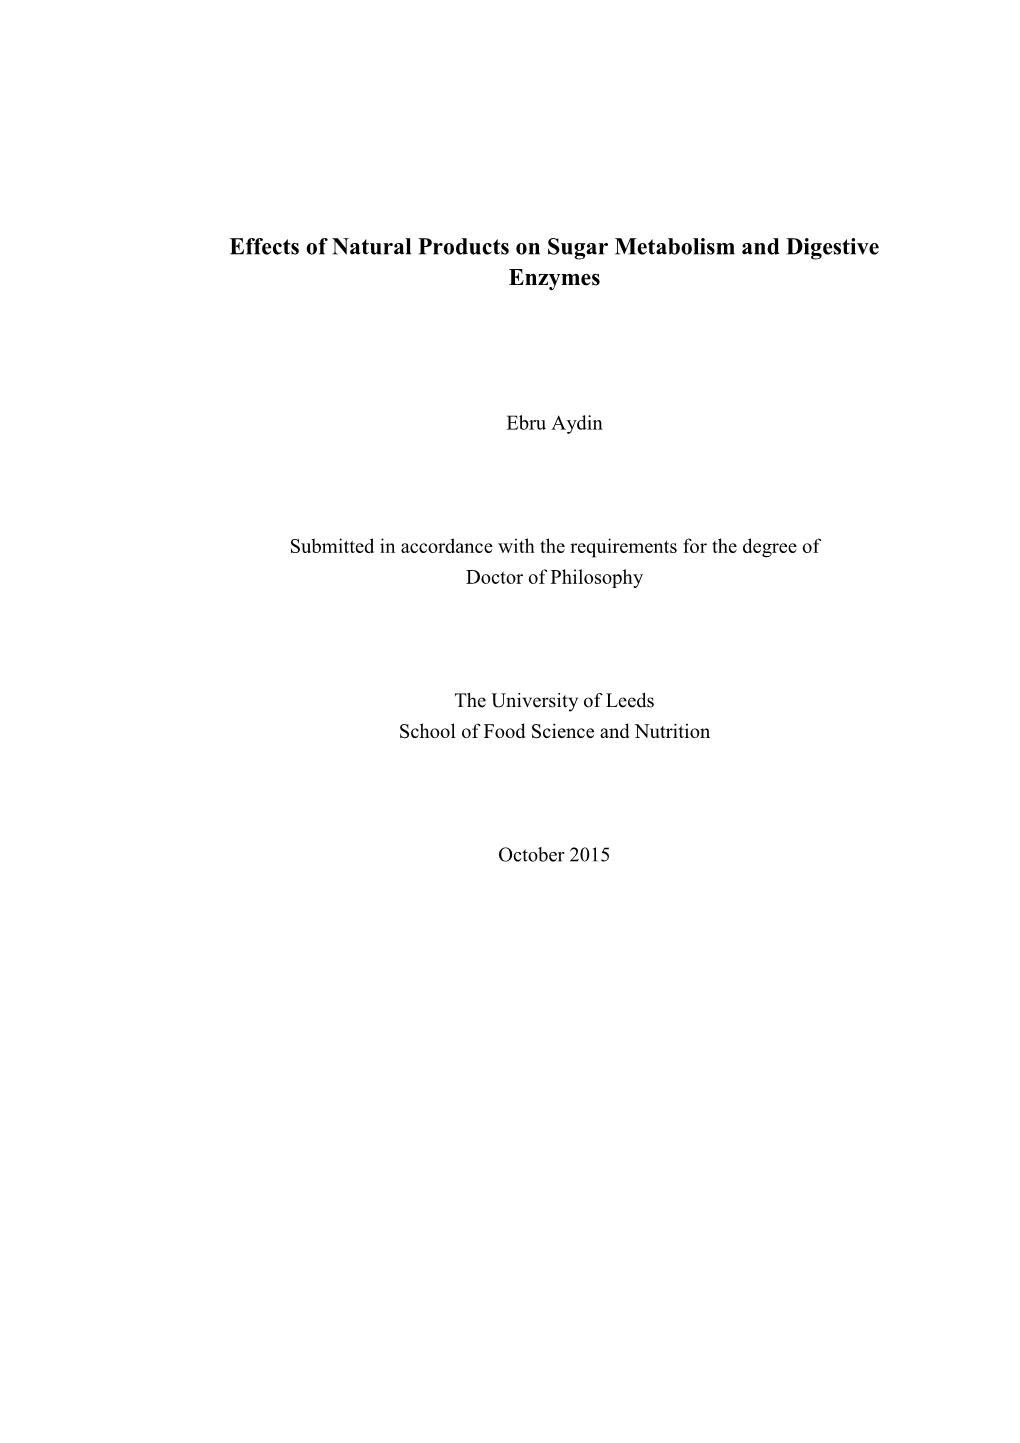 Effects of Natural Products on Sugar Metabolism and Digestive Enzymes